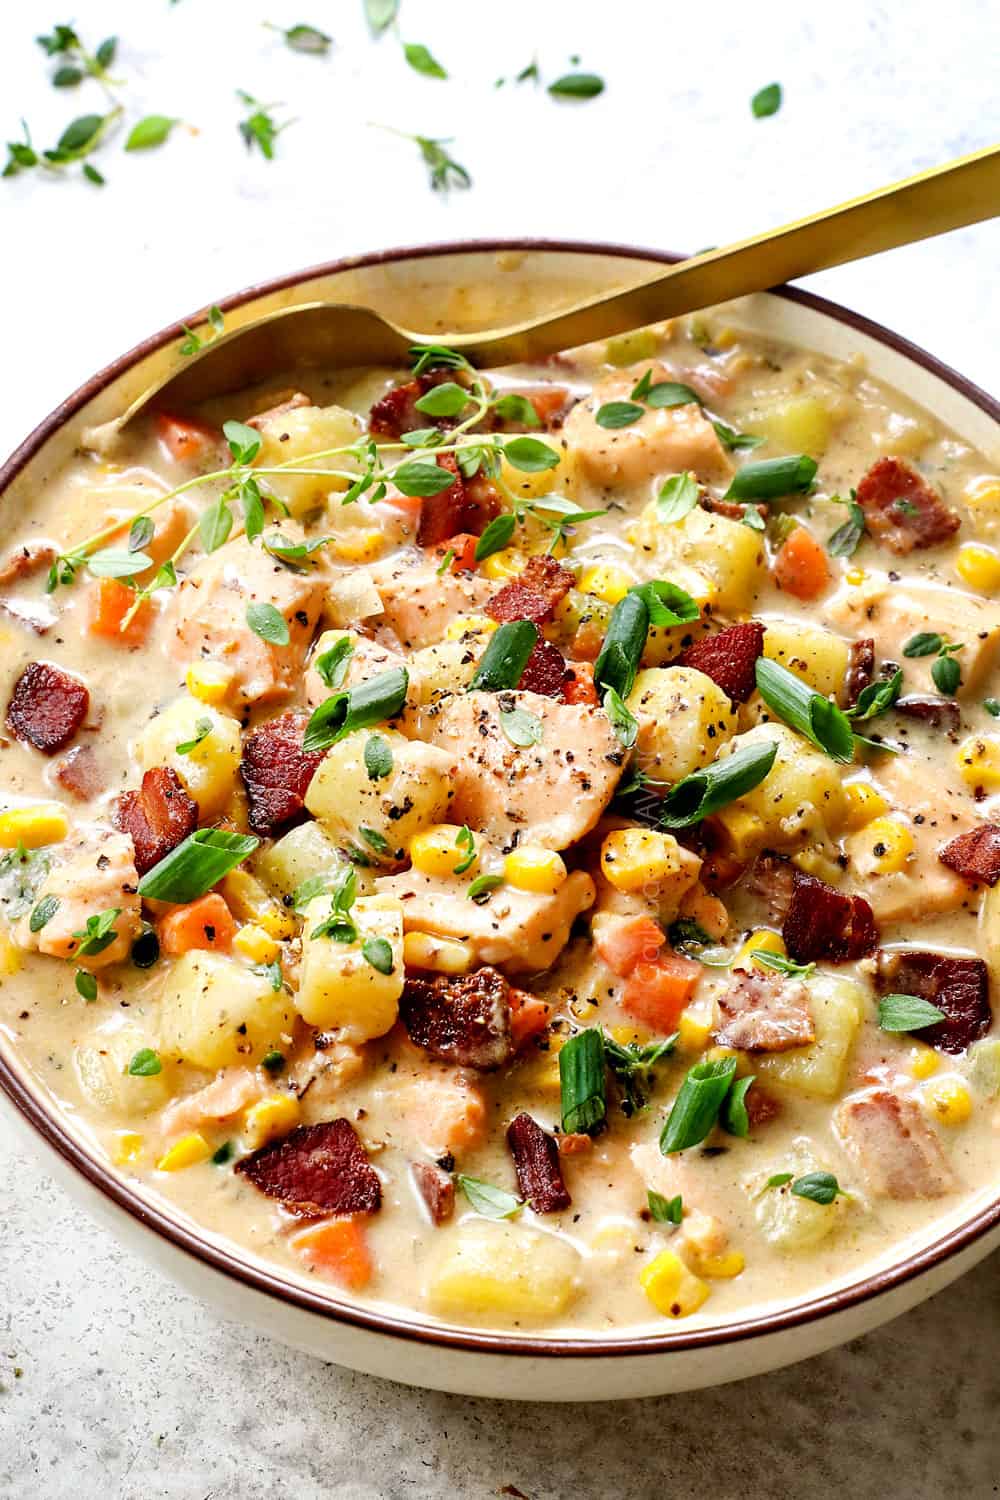 a bowl of salmon chowder recipe (fish chowder) showing how to serve it by garnishing with green onions, crispy bacon and fresh thyme